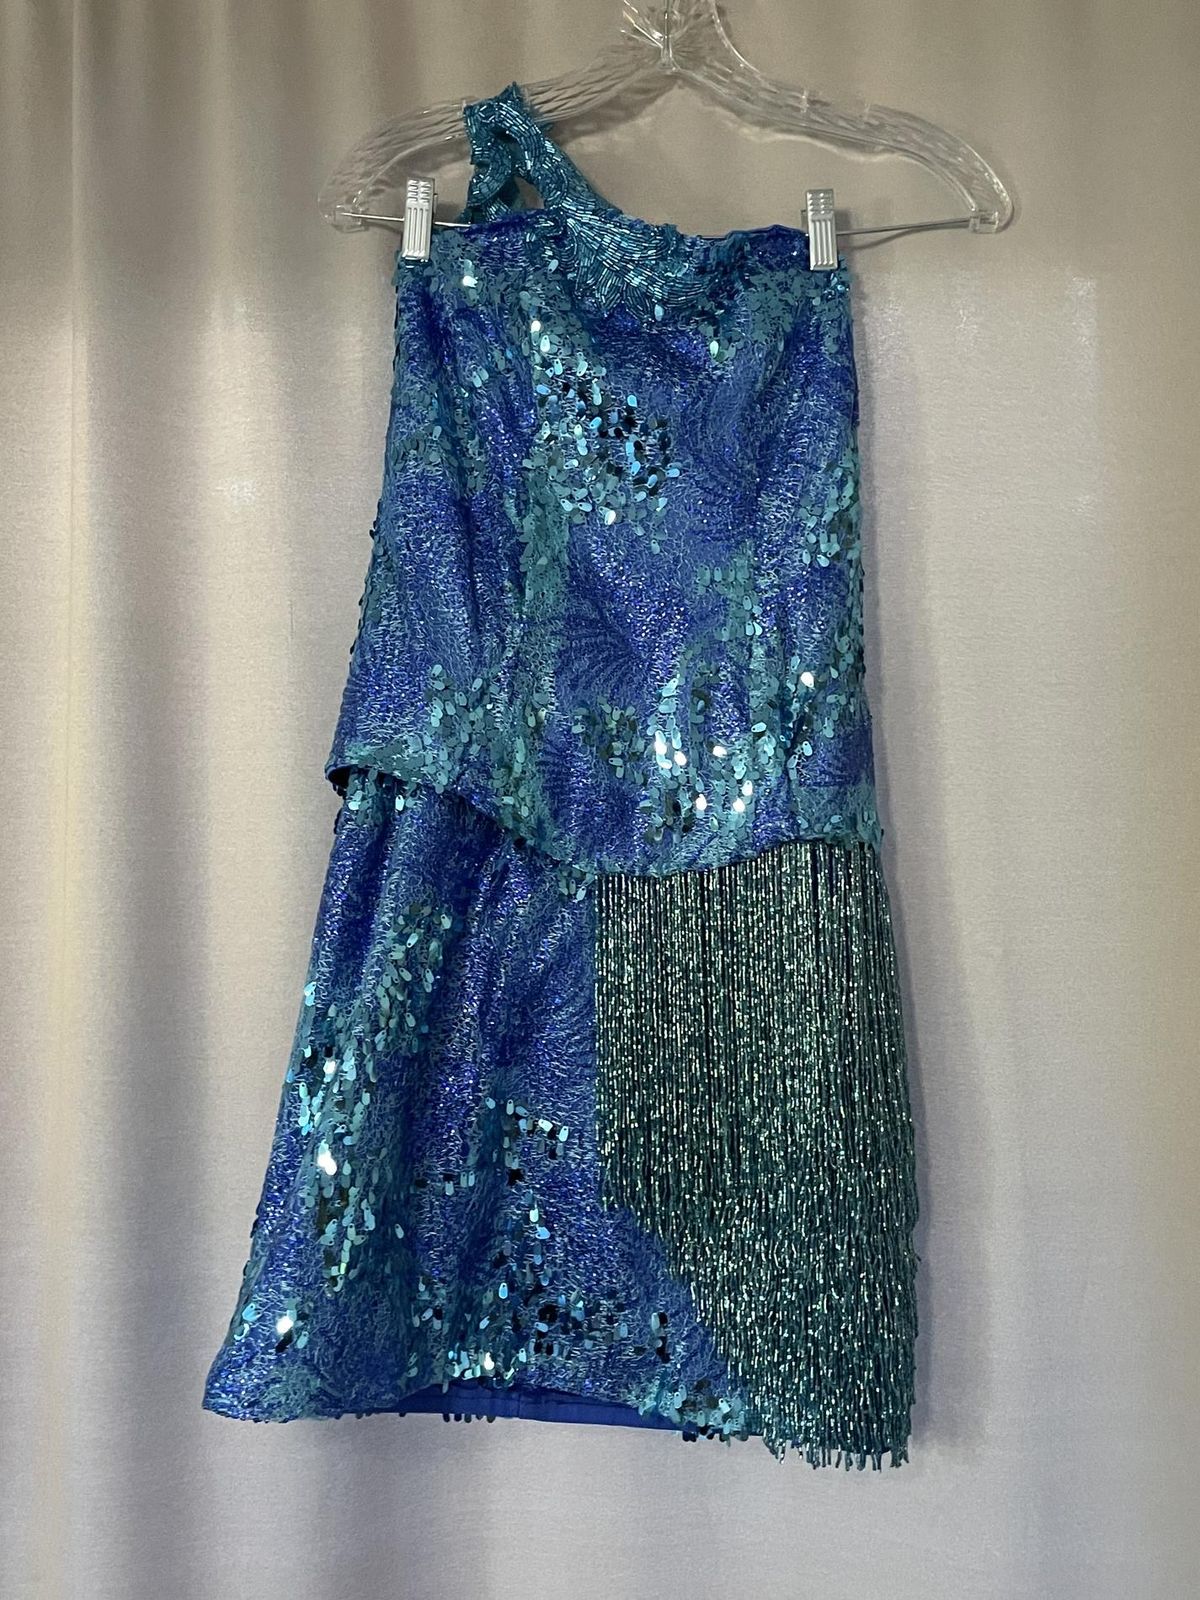 Custom! Size 4 Homecoming One Shoulder Blue Cocktail Dress on Queenly